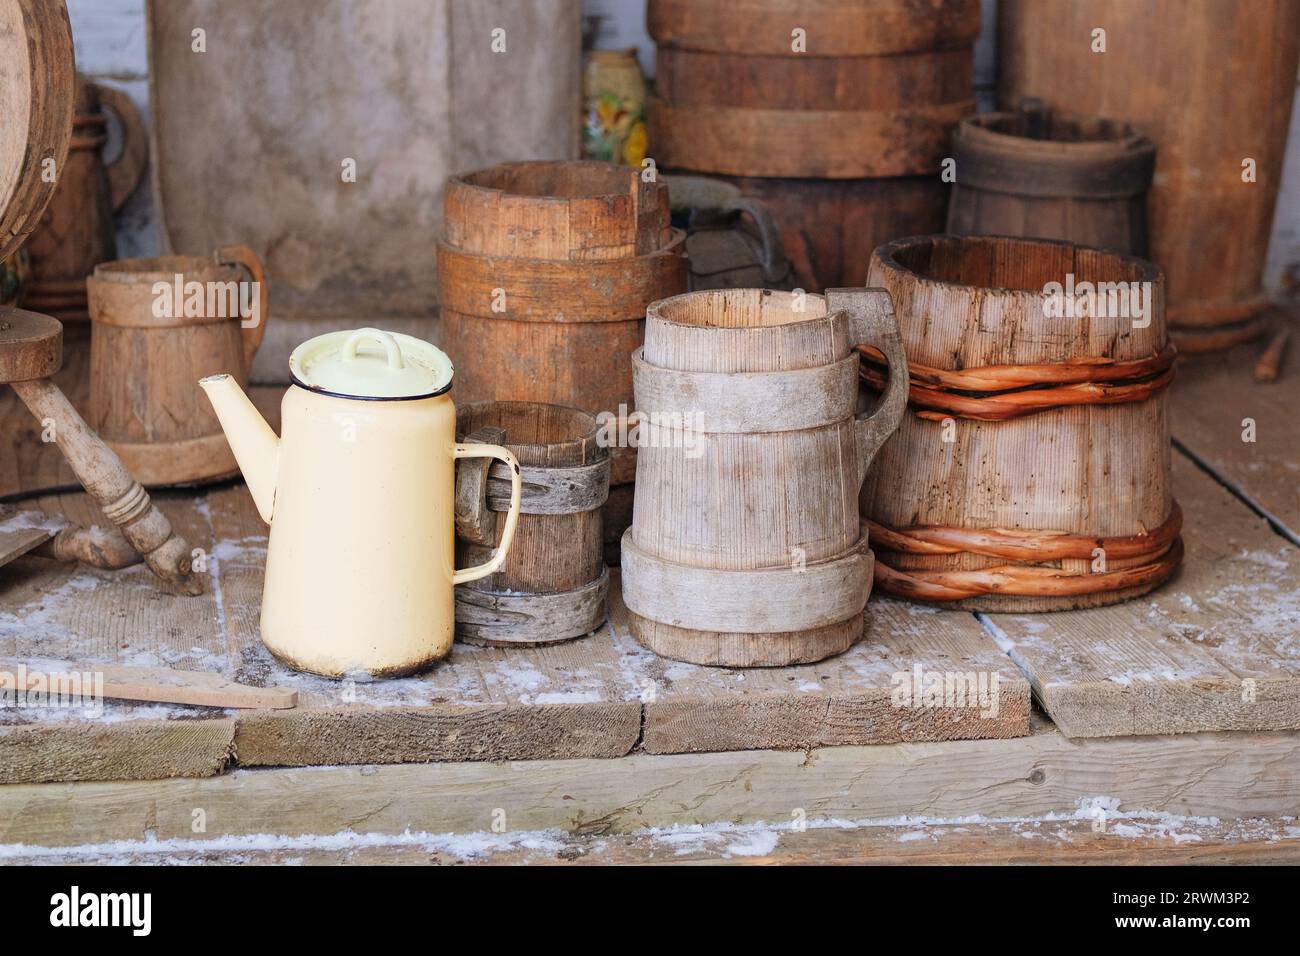 Wooden traditional pot in vintage style. Ukrainian cultural national style. Installation in museums of traditional rural household items. Stock Photo